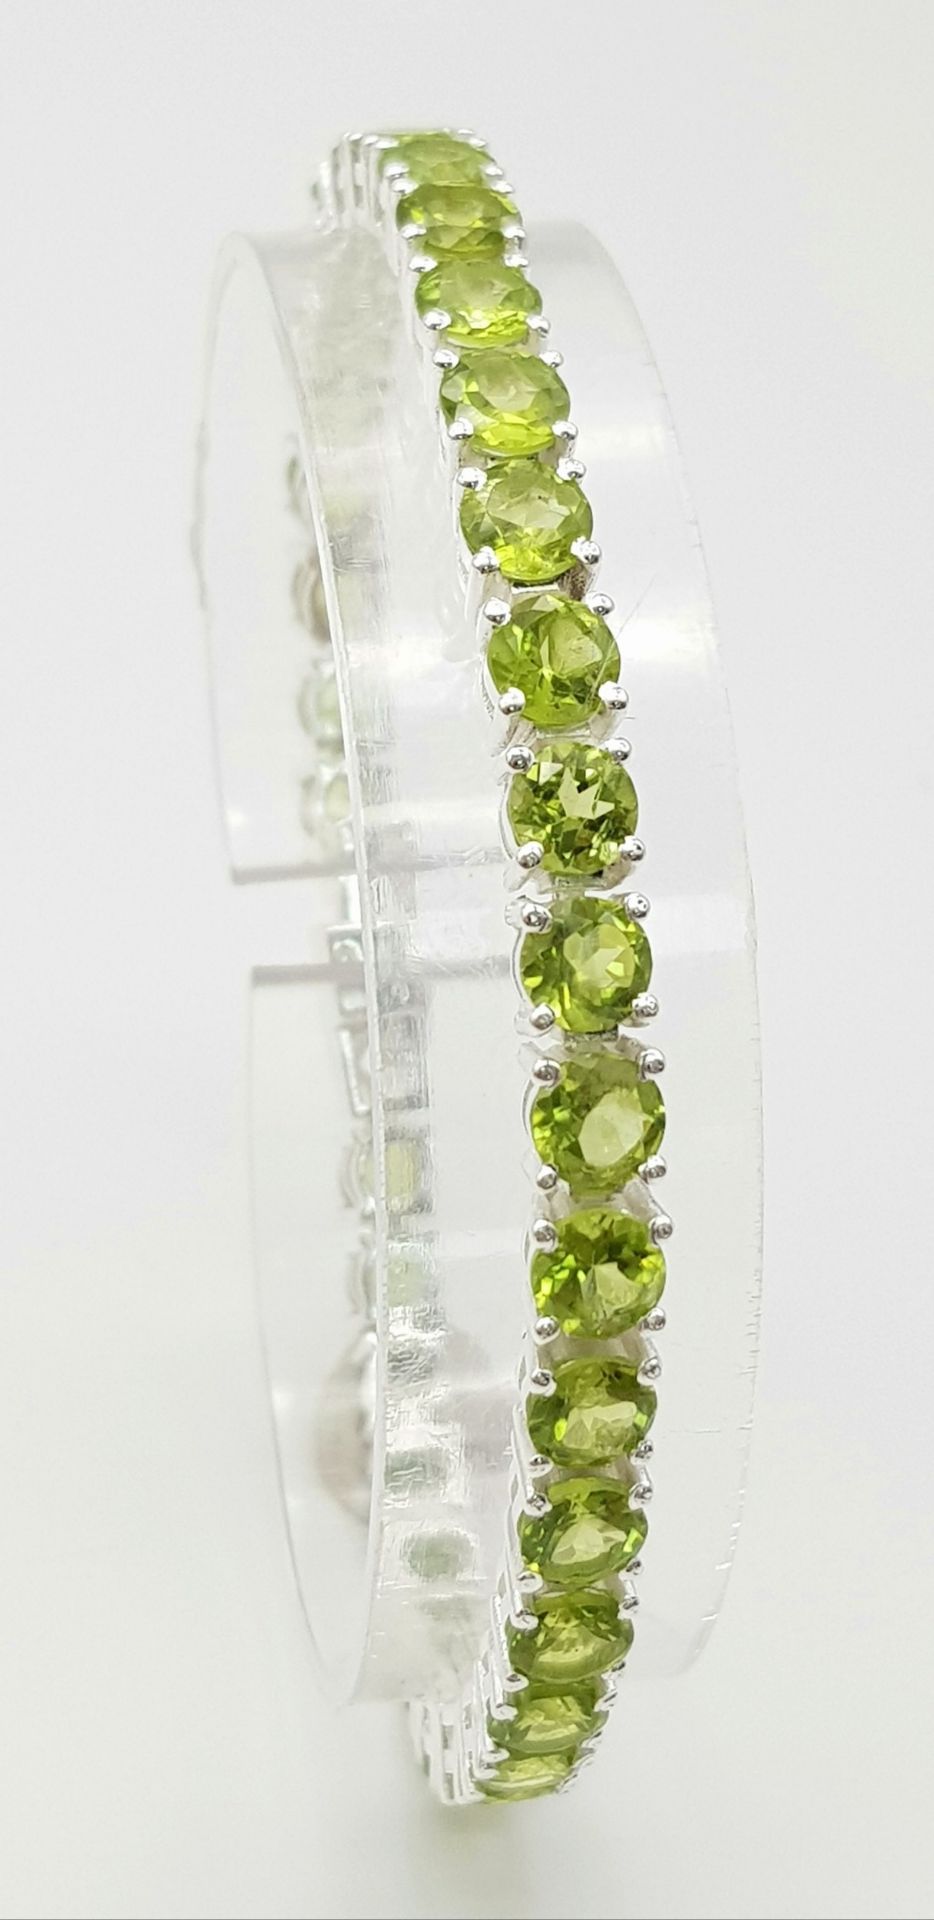 A Peridot Gemstone Tennis Bracelet with a Peridot Rondelle Necklace. Both with silver clasps. - Image 6 of 6